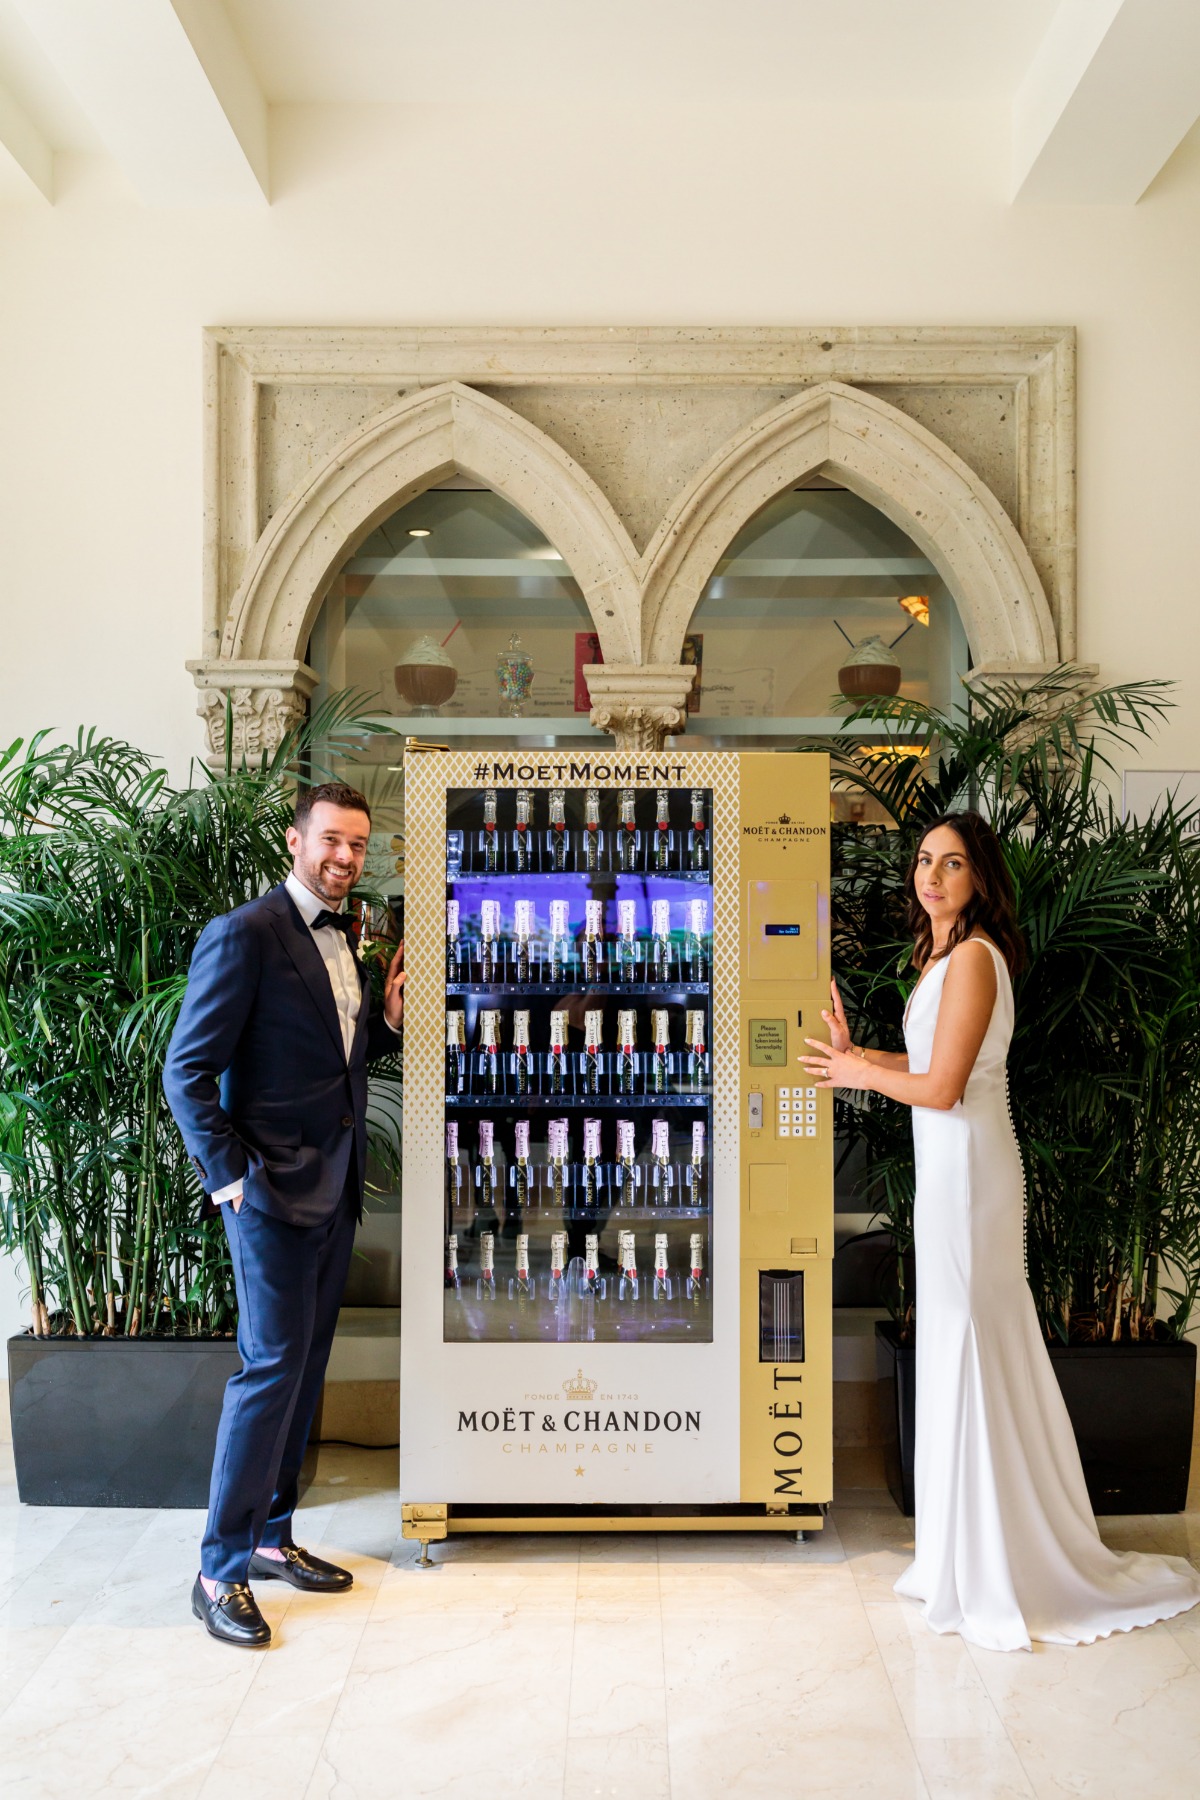 You can buy this Moet & Chandon Champagne vending machine